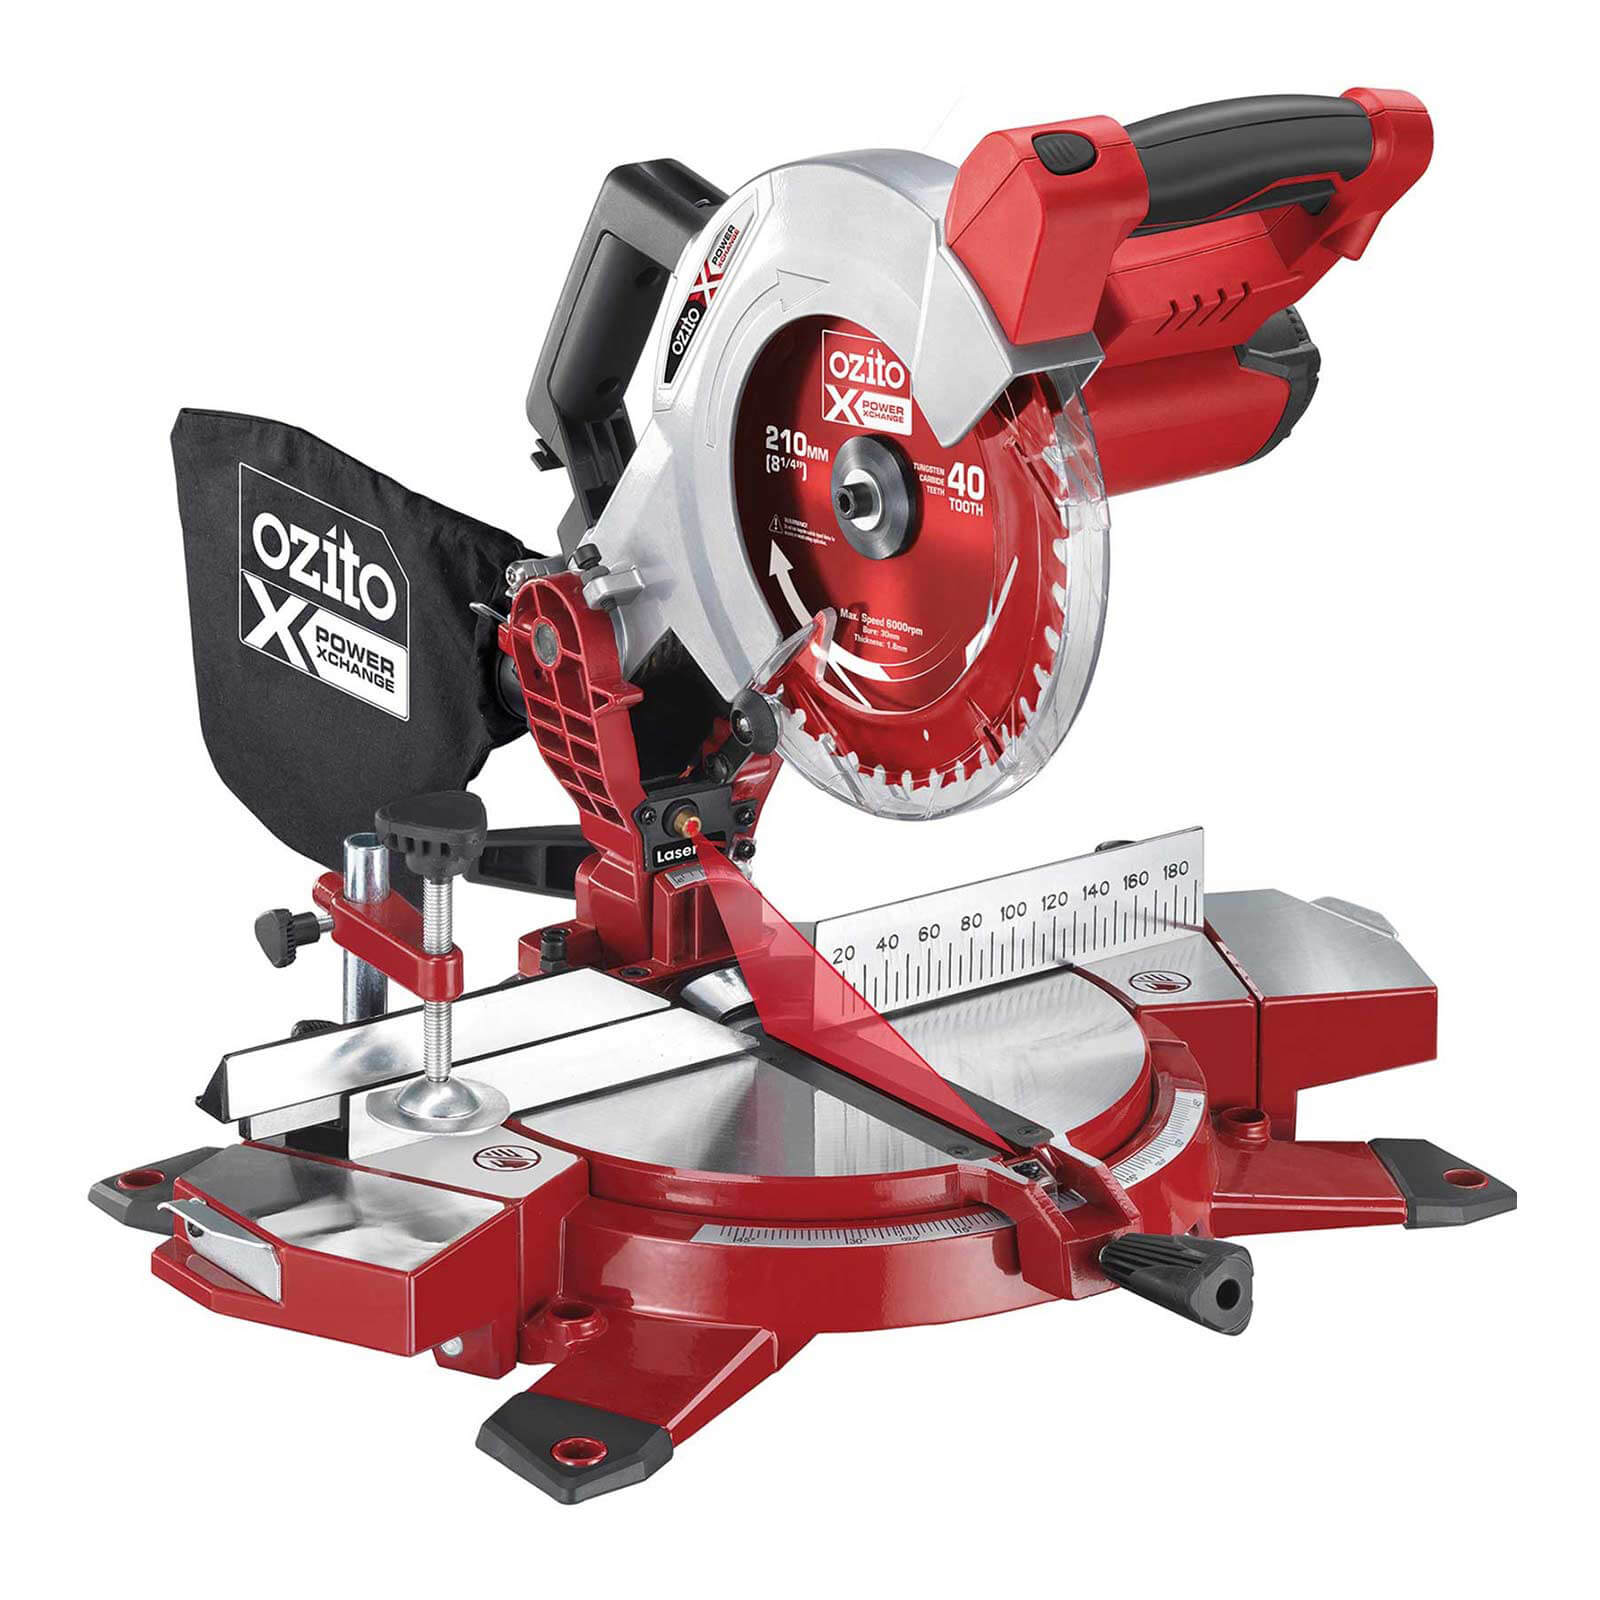 Image of Ozito PXCMSS 18v Cordless Compound Mitre Saw 210mm No Batteries No Charger No Case